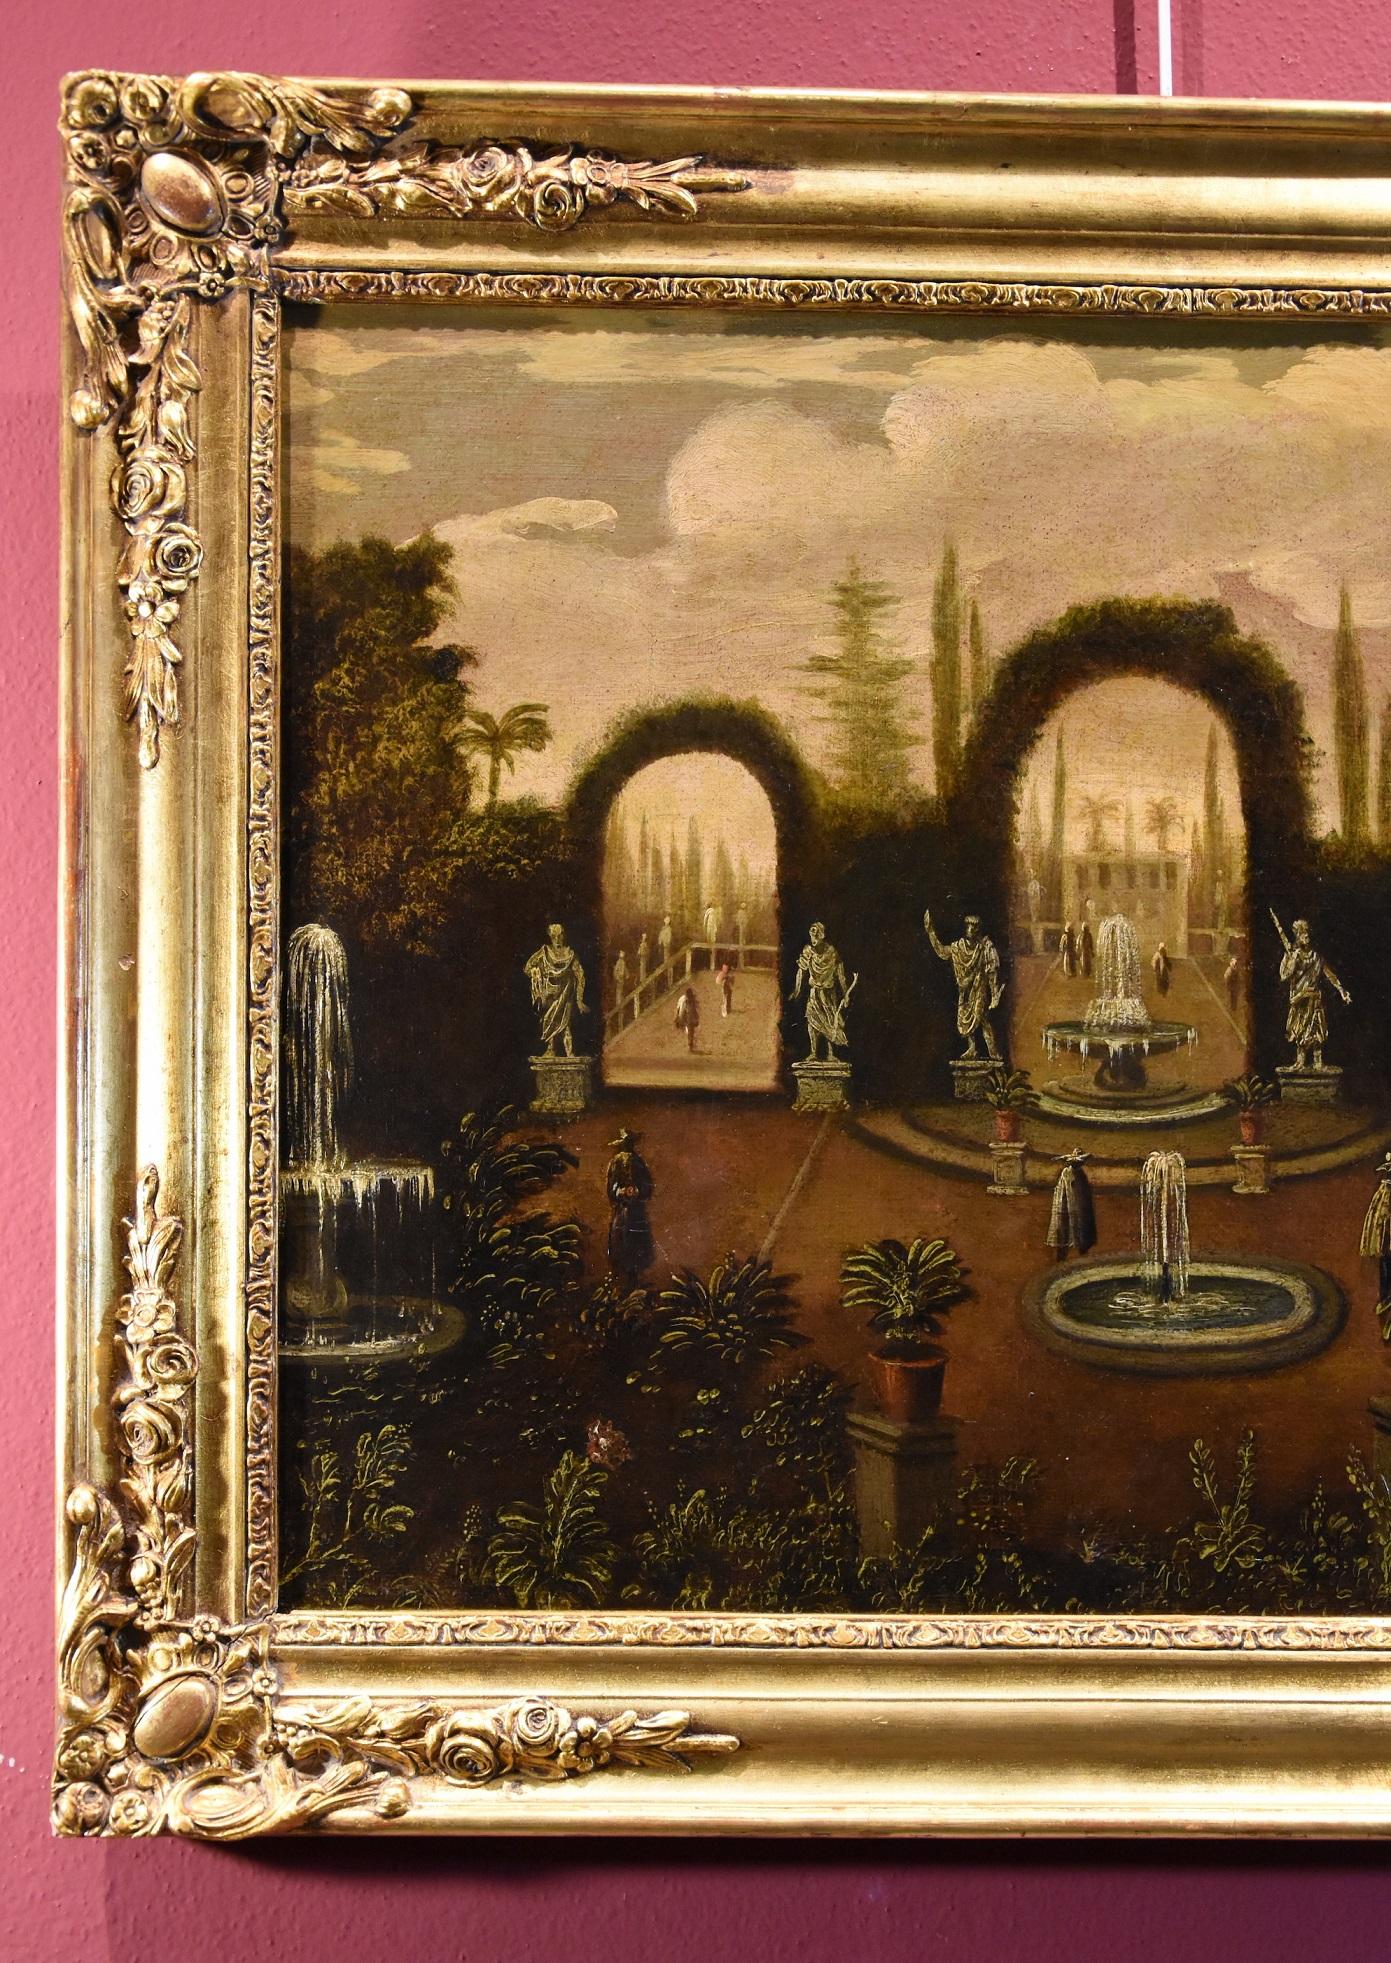 Flemish painter active in Rome in the 17th-18th centuries
Circle of Isaac de Moucheron (Amsterdam 1667 - 1744)
Italian garden with water features in a villa

Oil on canvas (49 x 65 cm. - In gilded frame 61 x 77 cm.)

We are delighted to present this